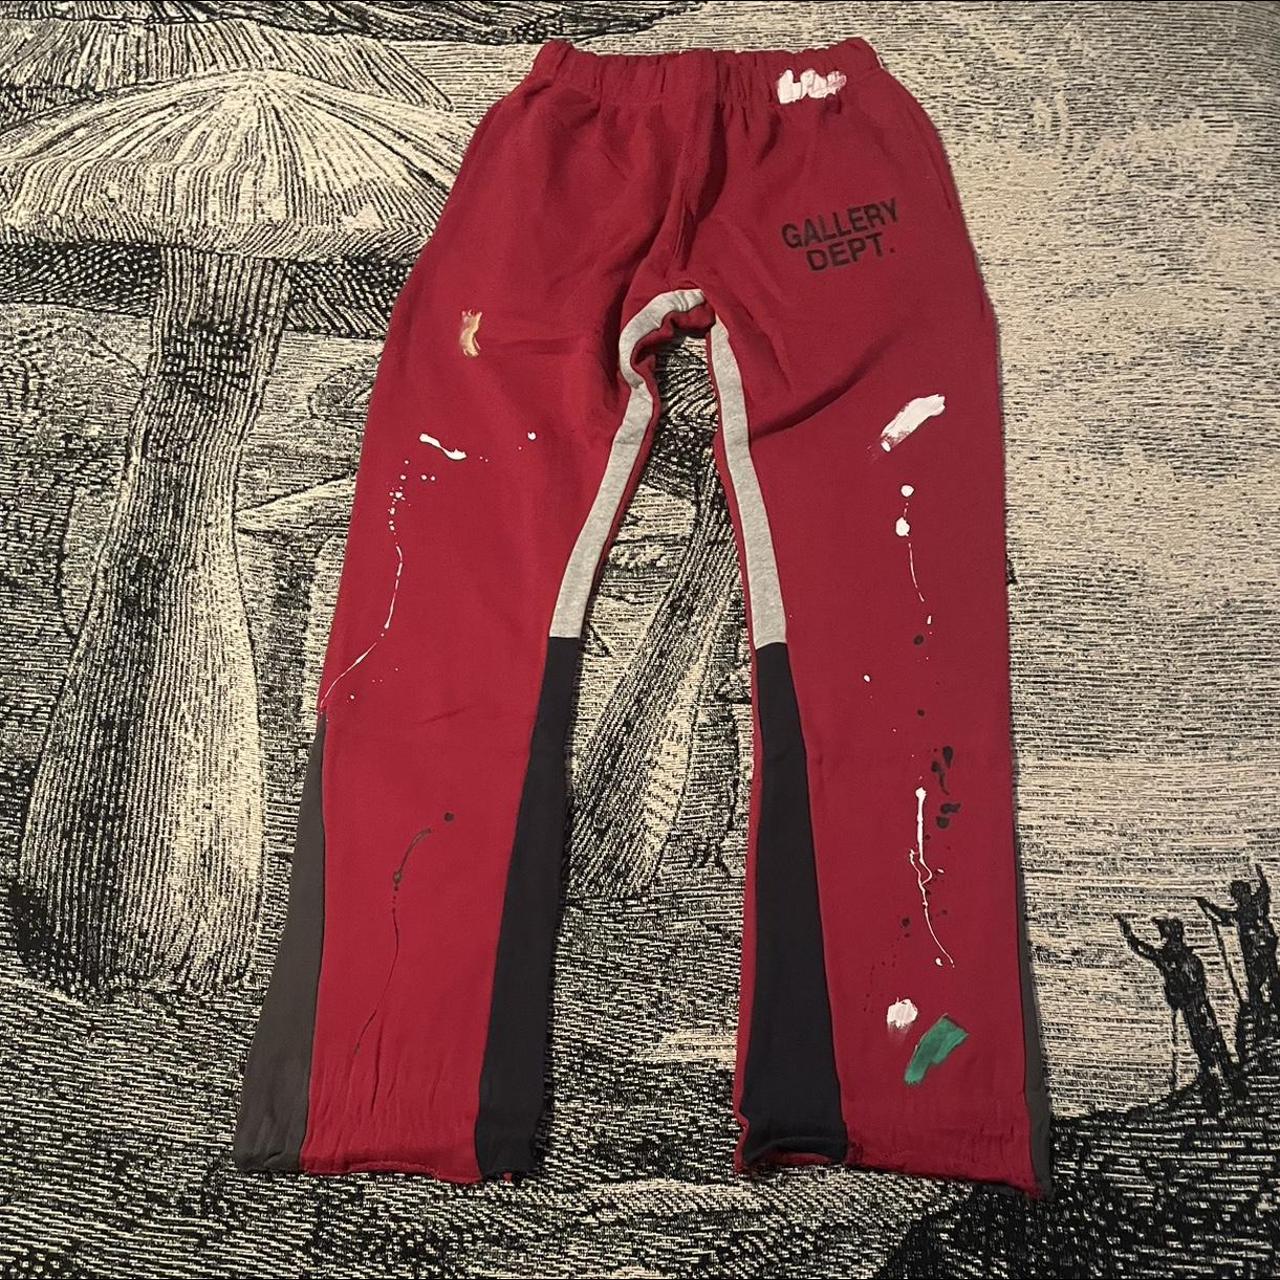 Gallery Dept. Sweatpants red/grey/navy with paint 🎨 - Depop